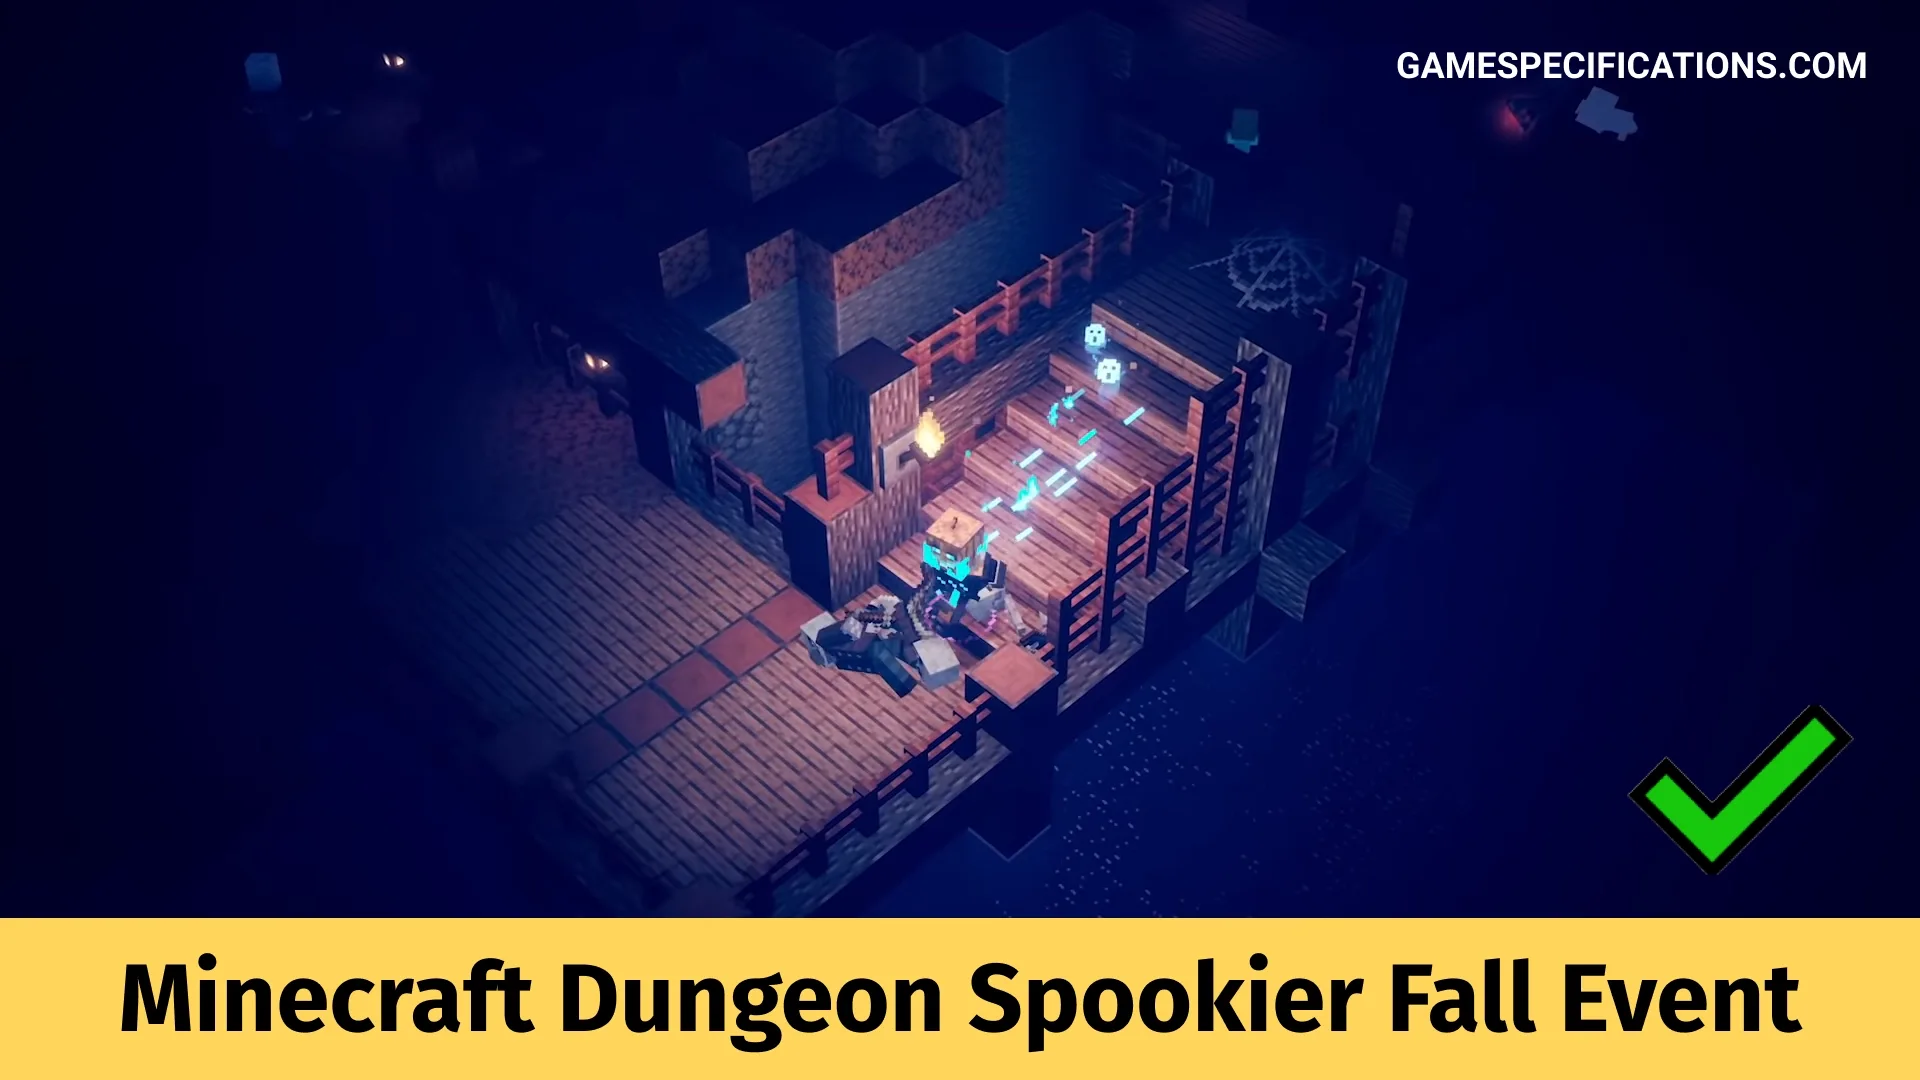 Minecraft Dungeon Spookier Fall: The Scarier The Better